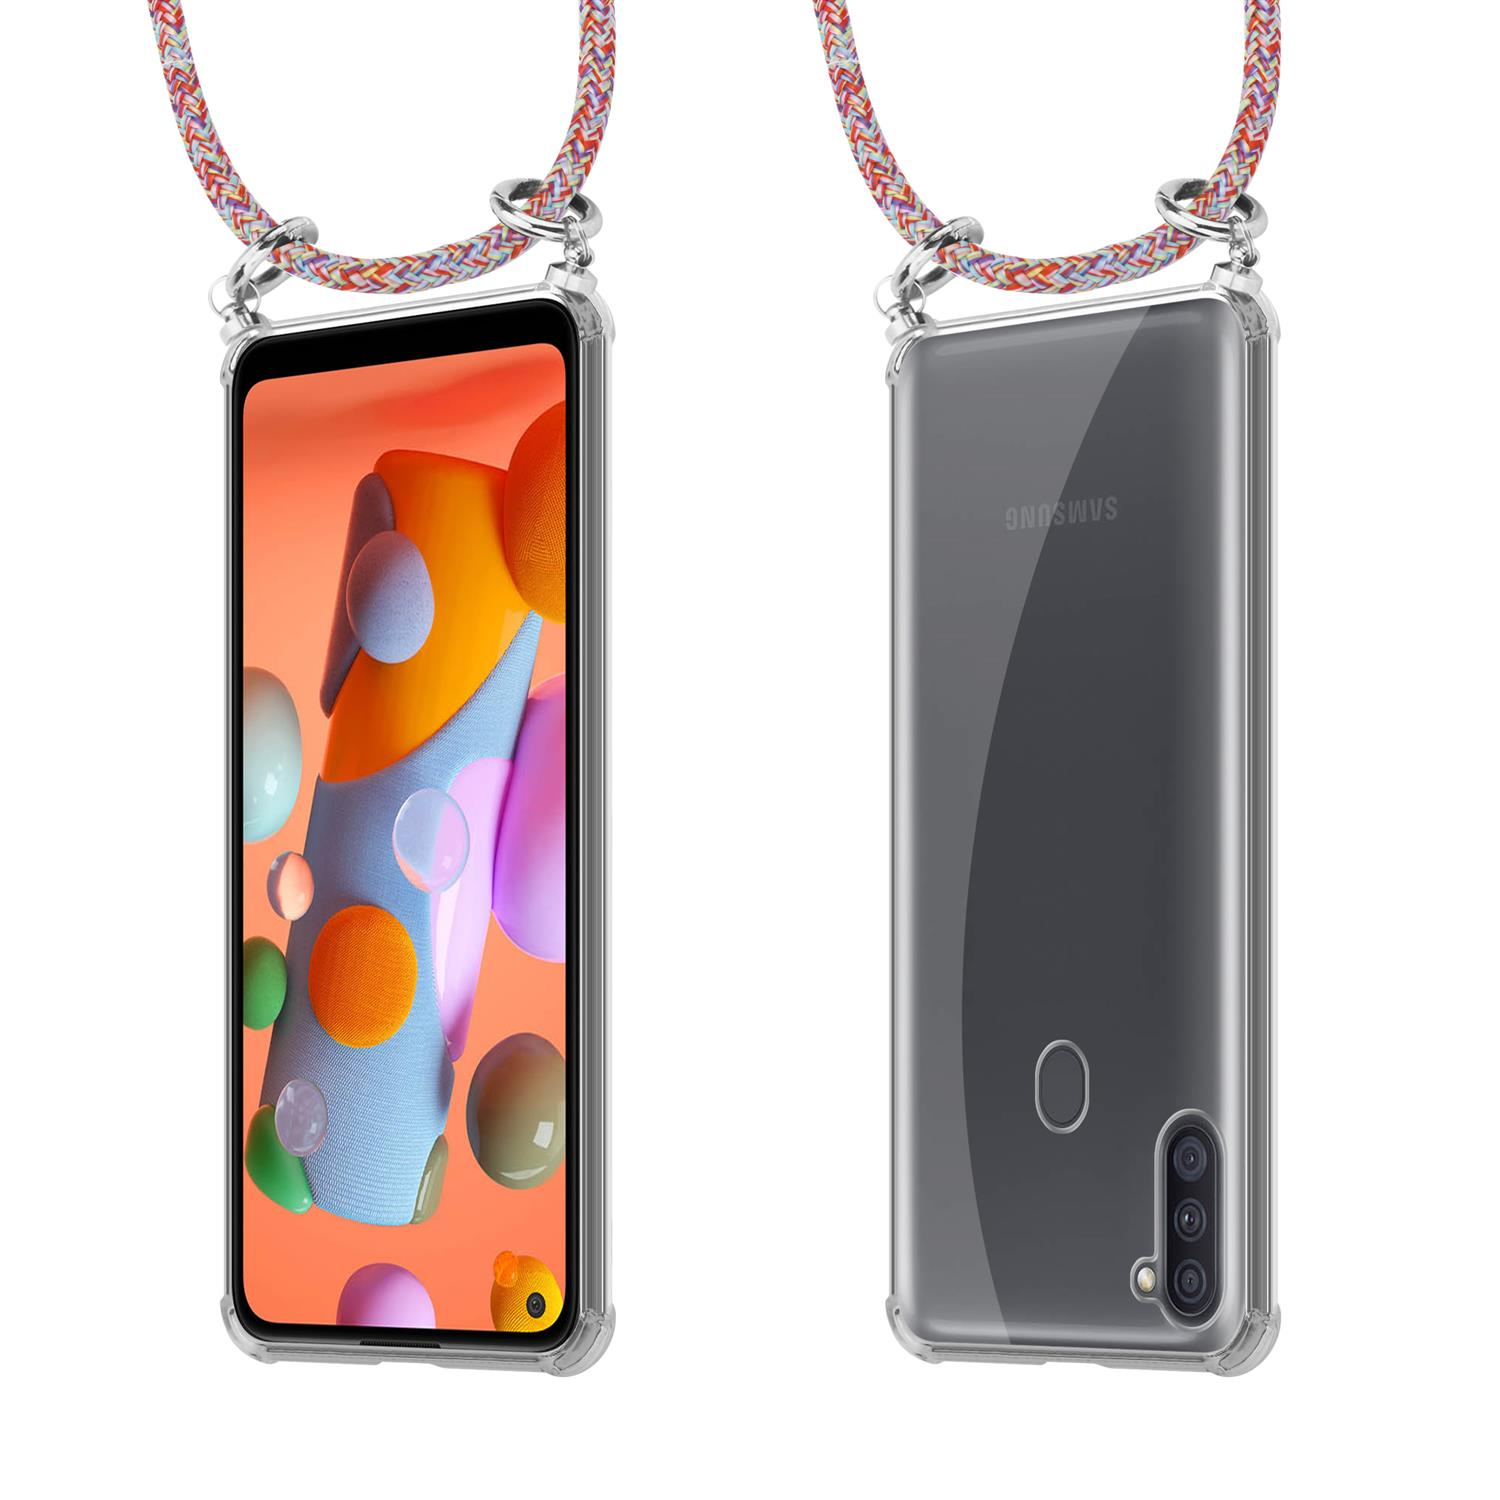 CADORABO Handy Kette / und PARROT mit Samsung, Ringen, A11 M11, abnehmbarer Hülle, Backcover, COLORFUL Kordel Band Silber Galaxy